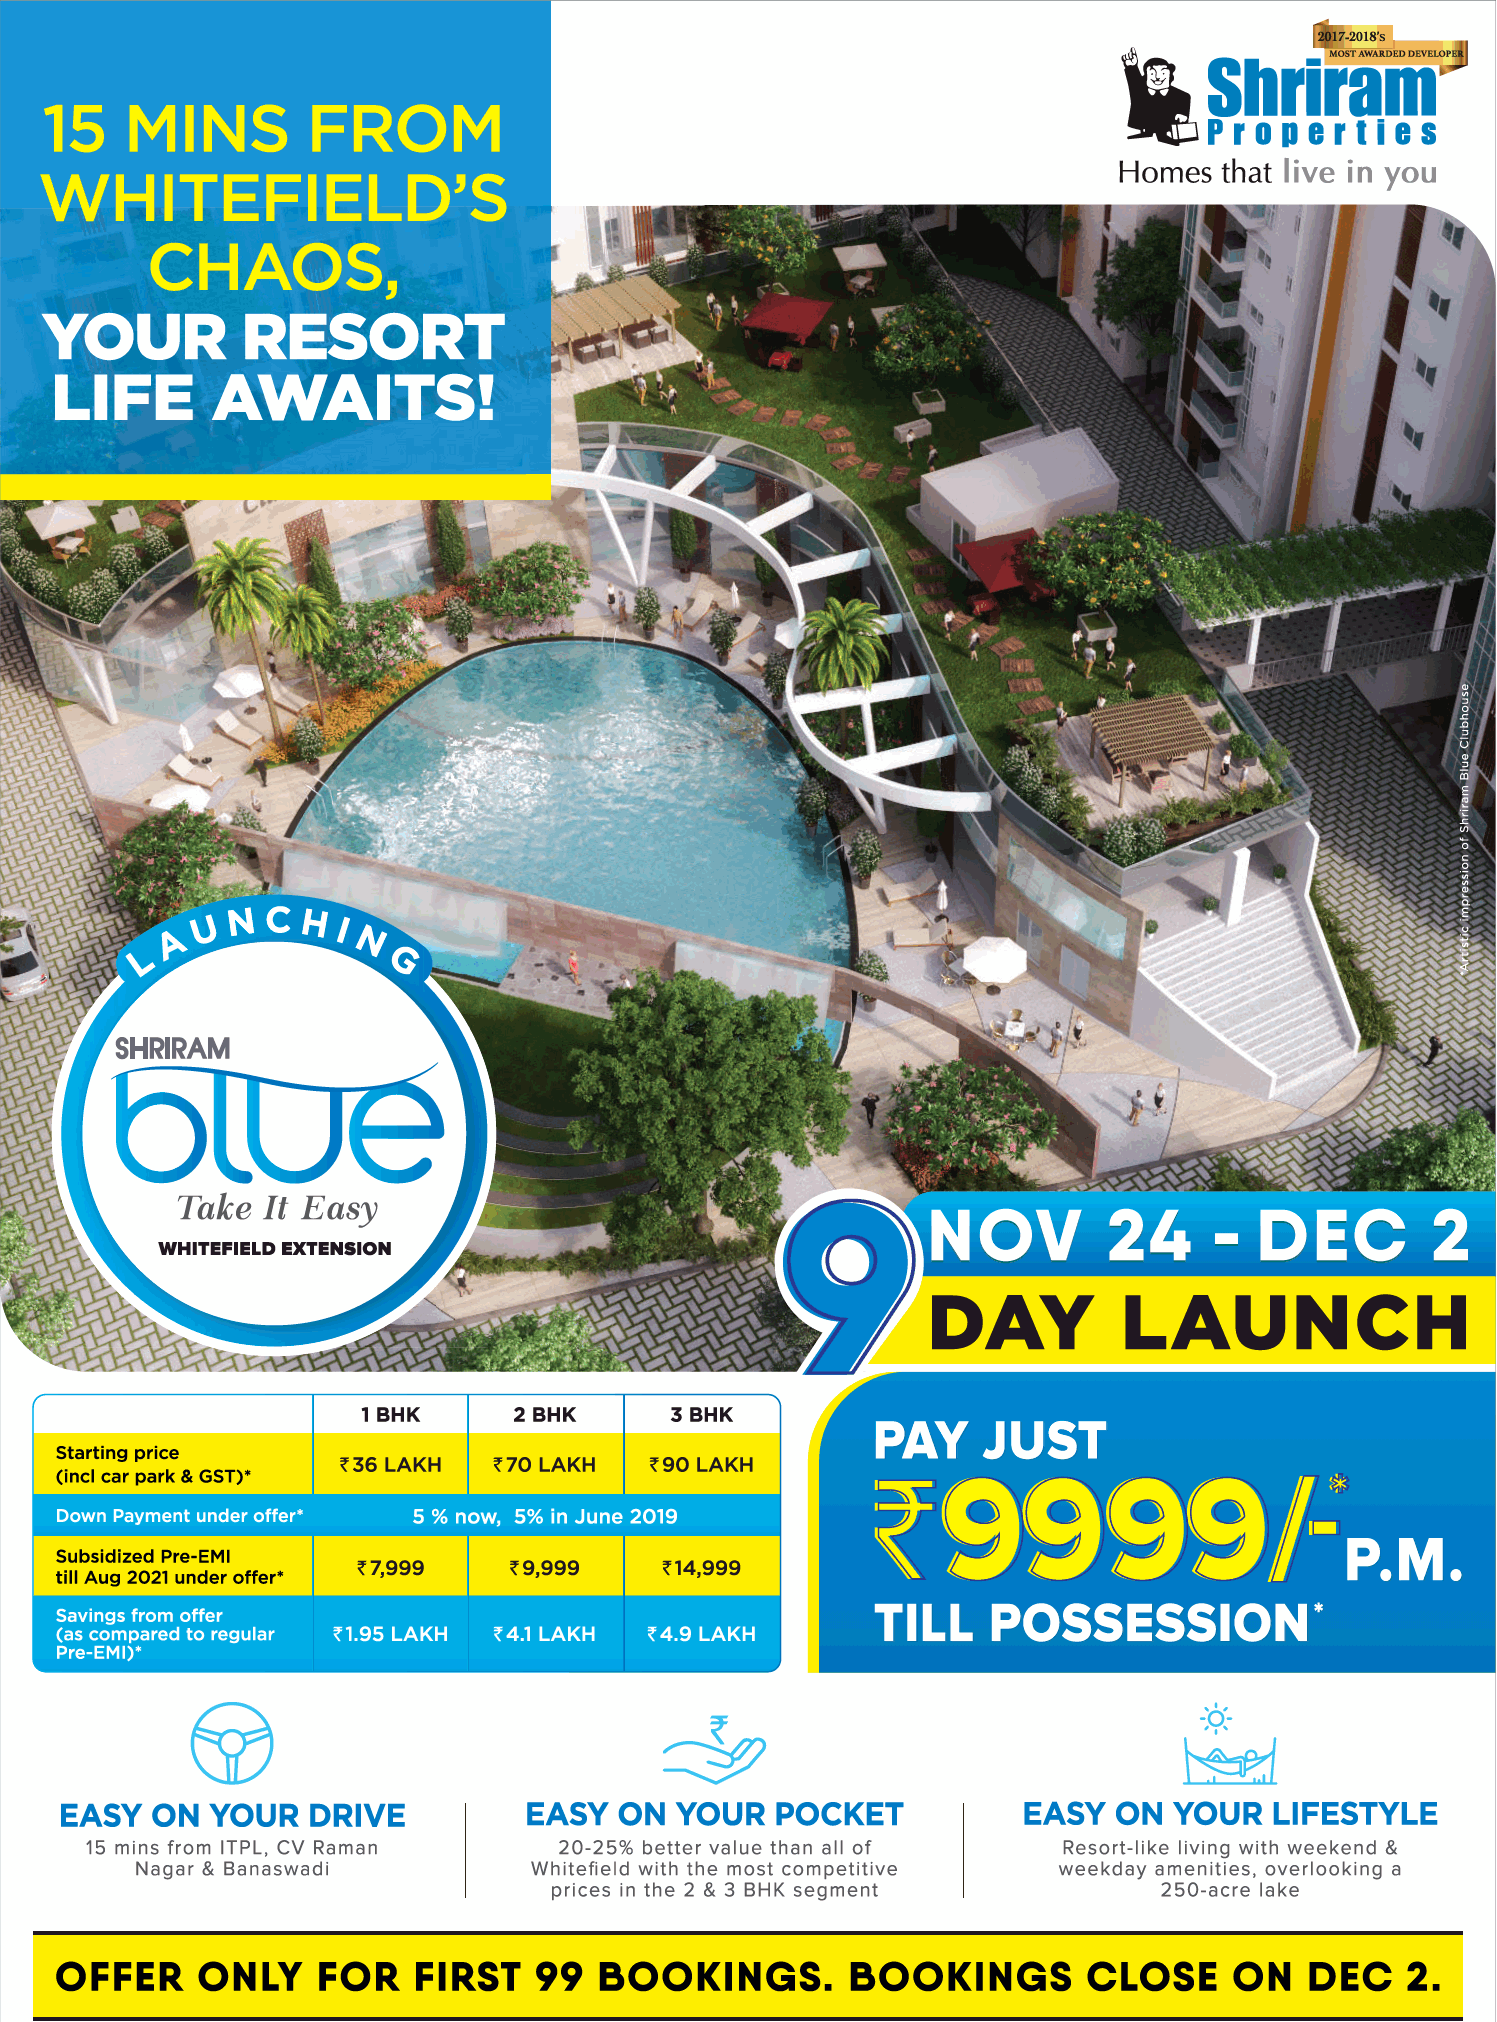 Pay just Rs 9999 p.m. till possession at Shriram Blue Take It Easy in Bangalore Update